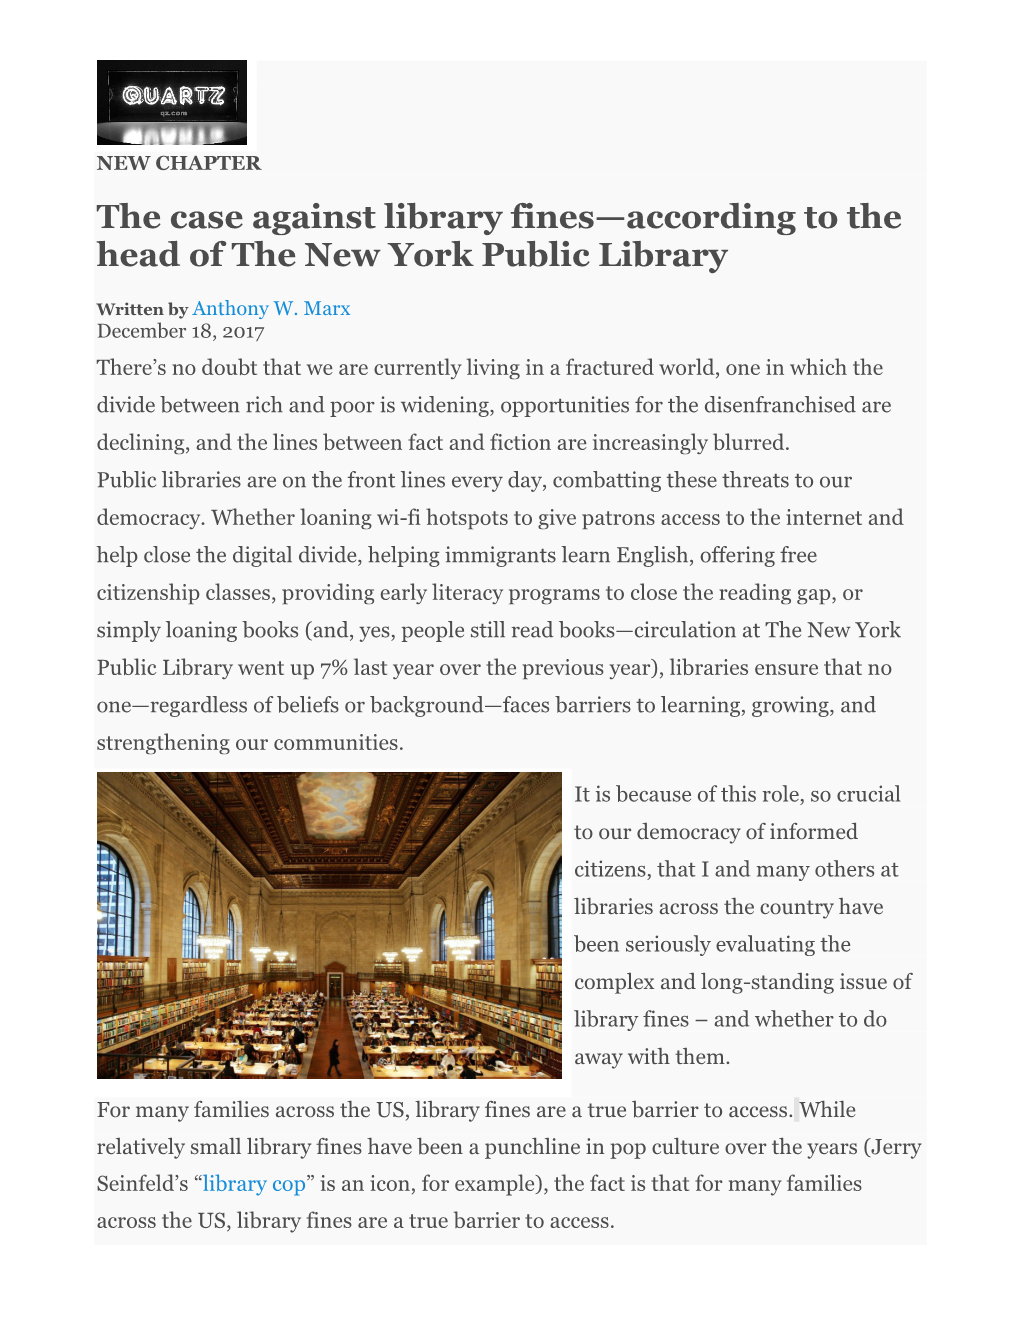 The Case Against Library Fines—According to the Head of the New York Public Library